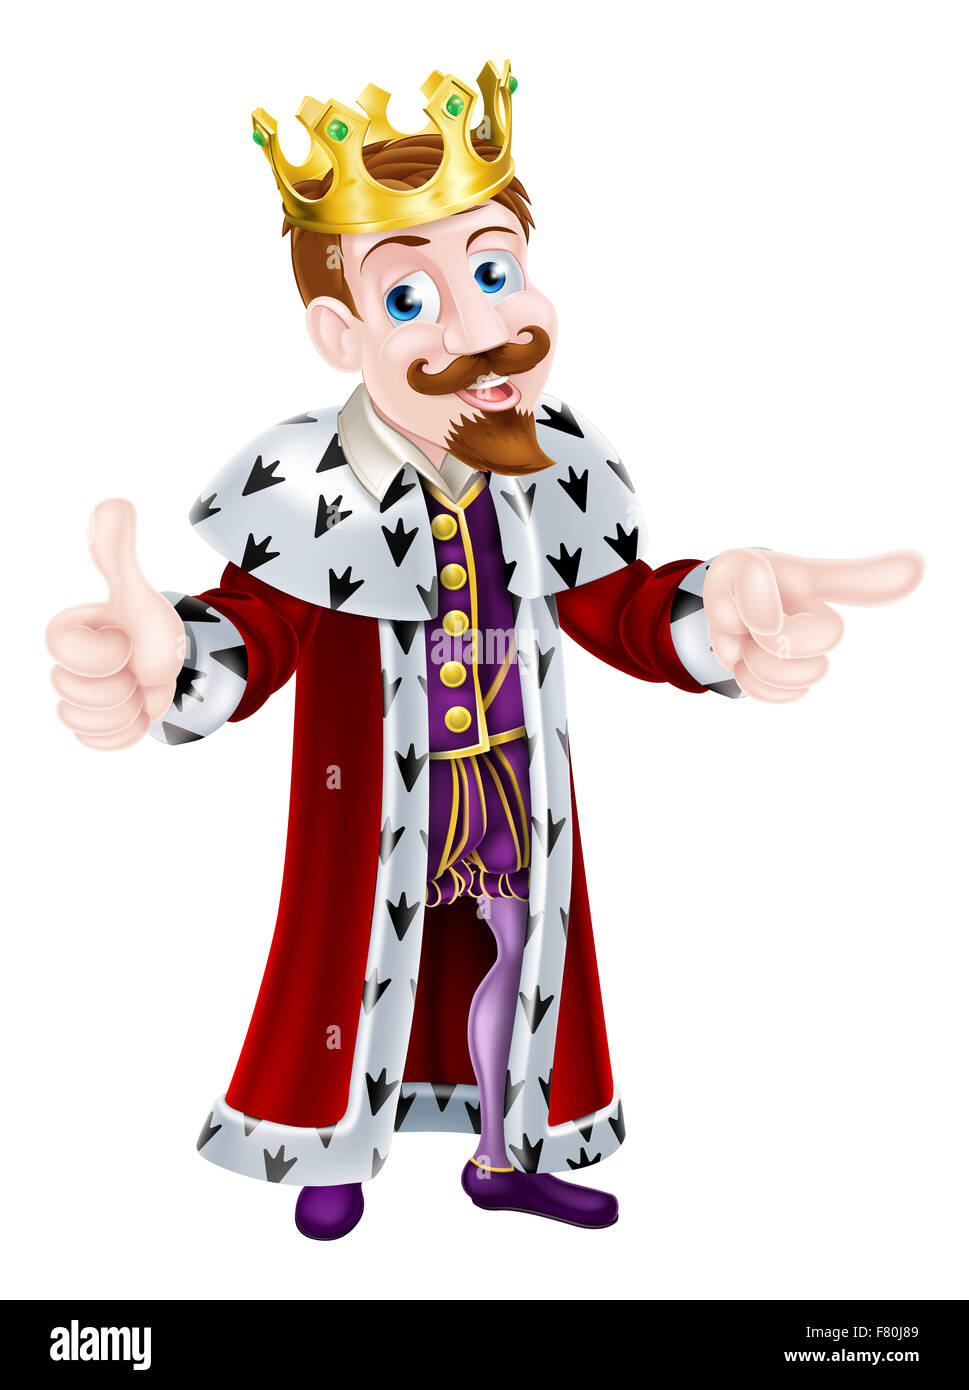 King cartoon character wearing a crown giving a thumbs up with one hand and pointing with the other Stock Photo